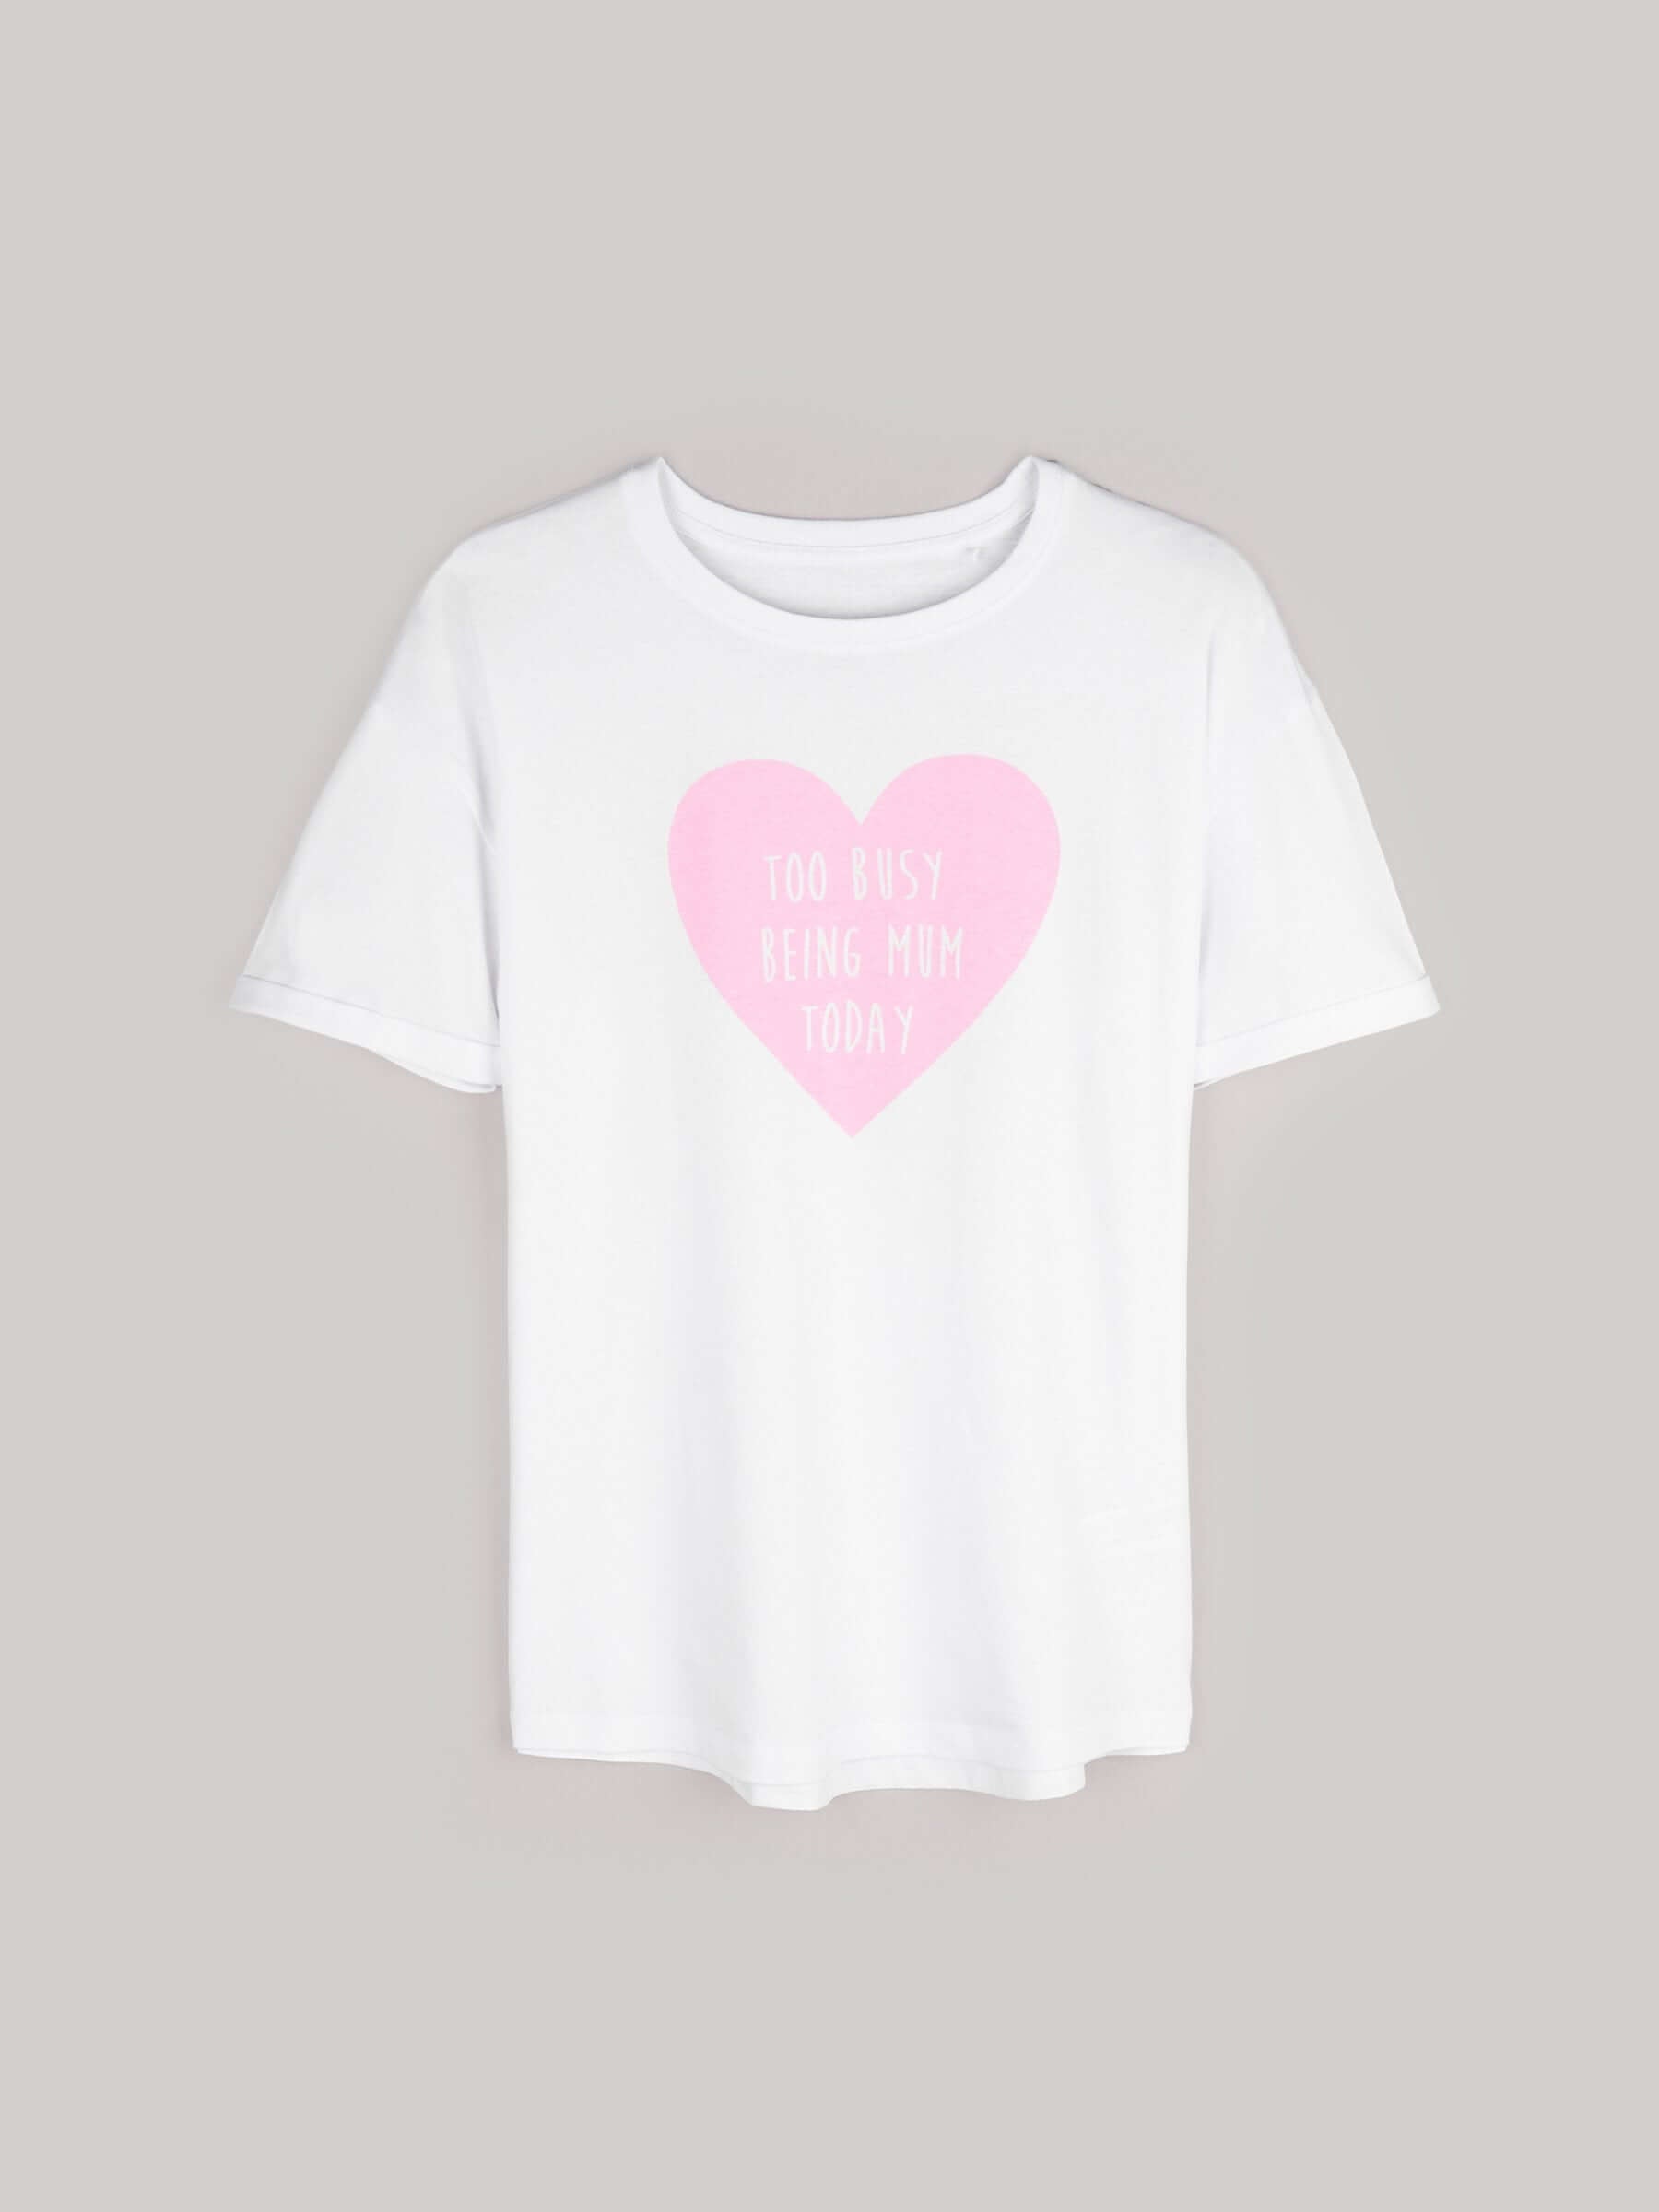 Tricou mamici din bumbac ''Too busy being mum today'' infant-ro